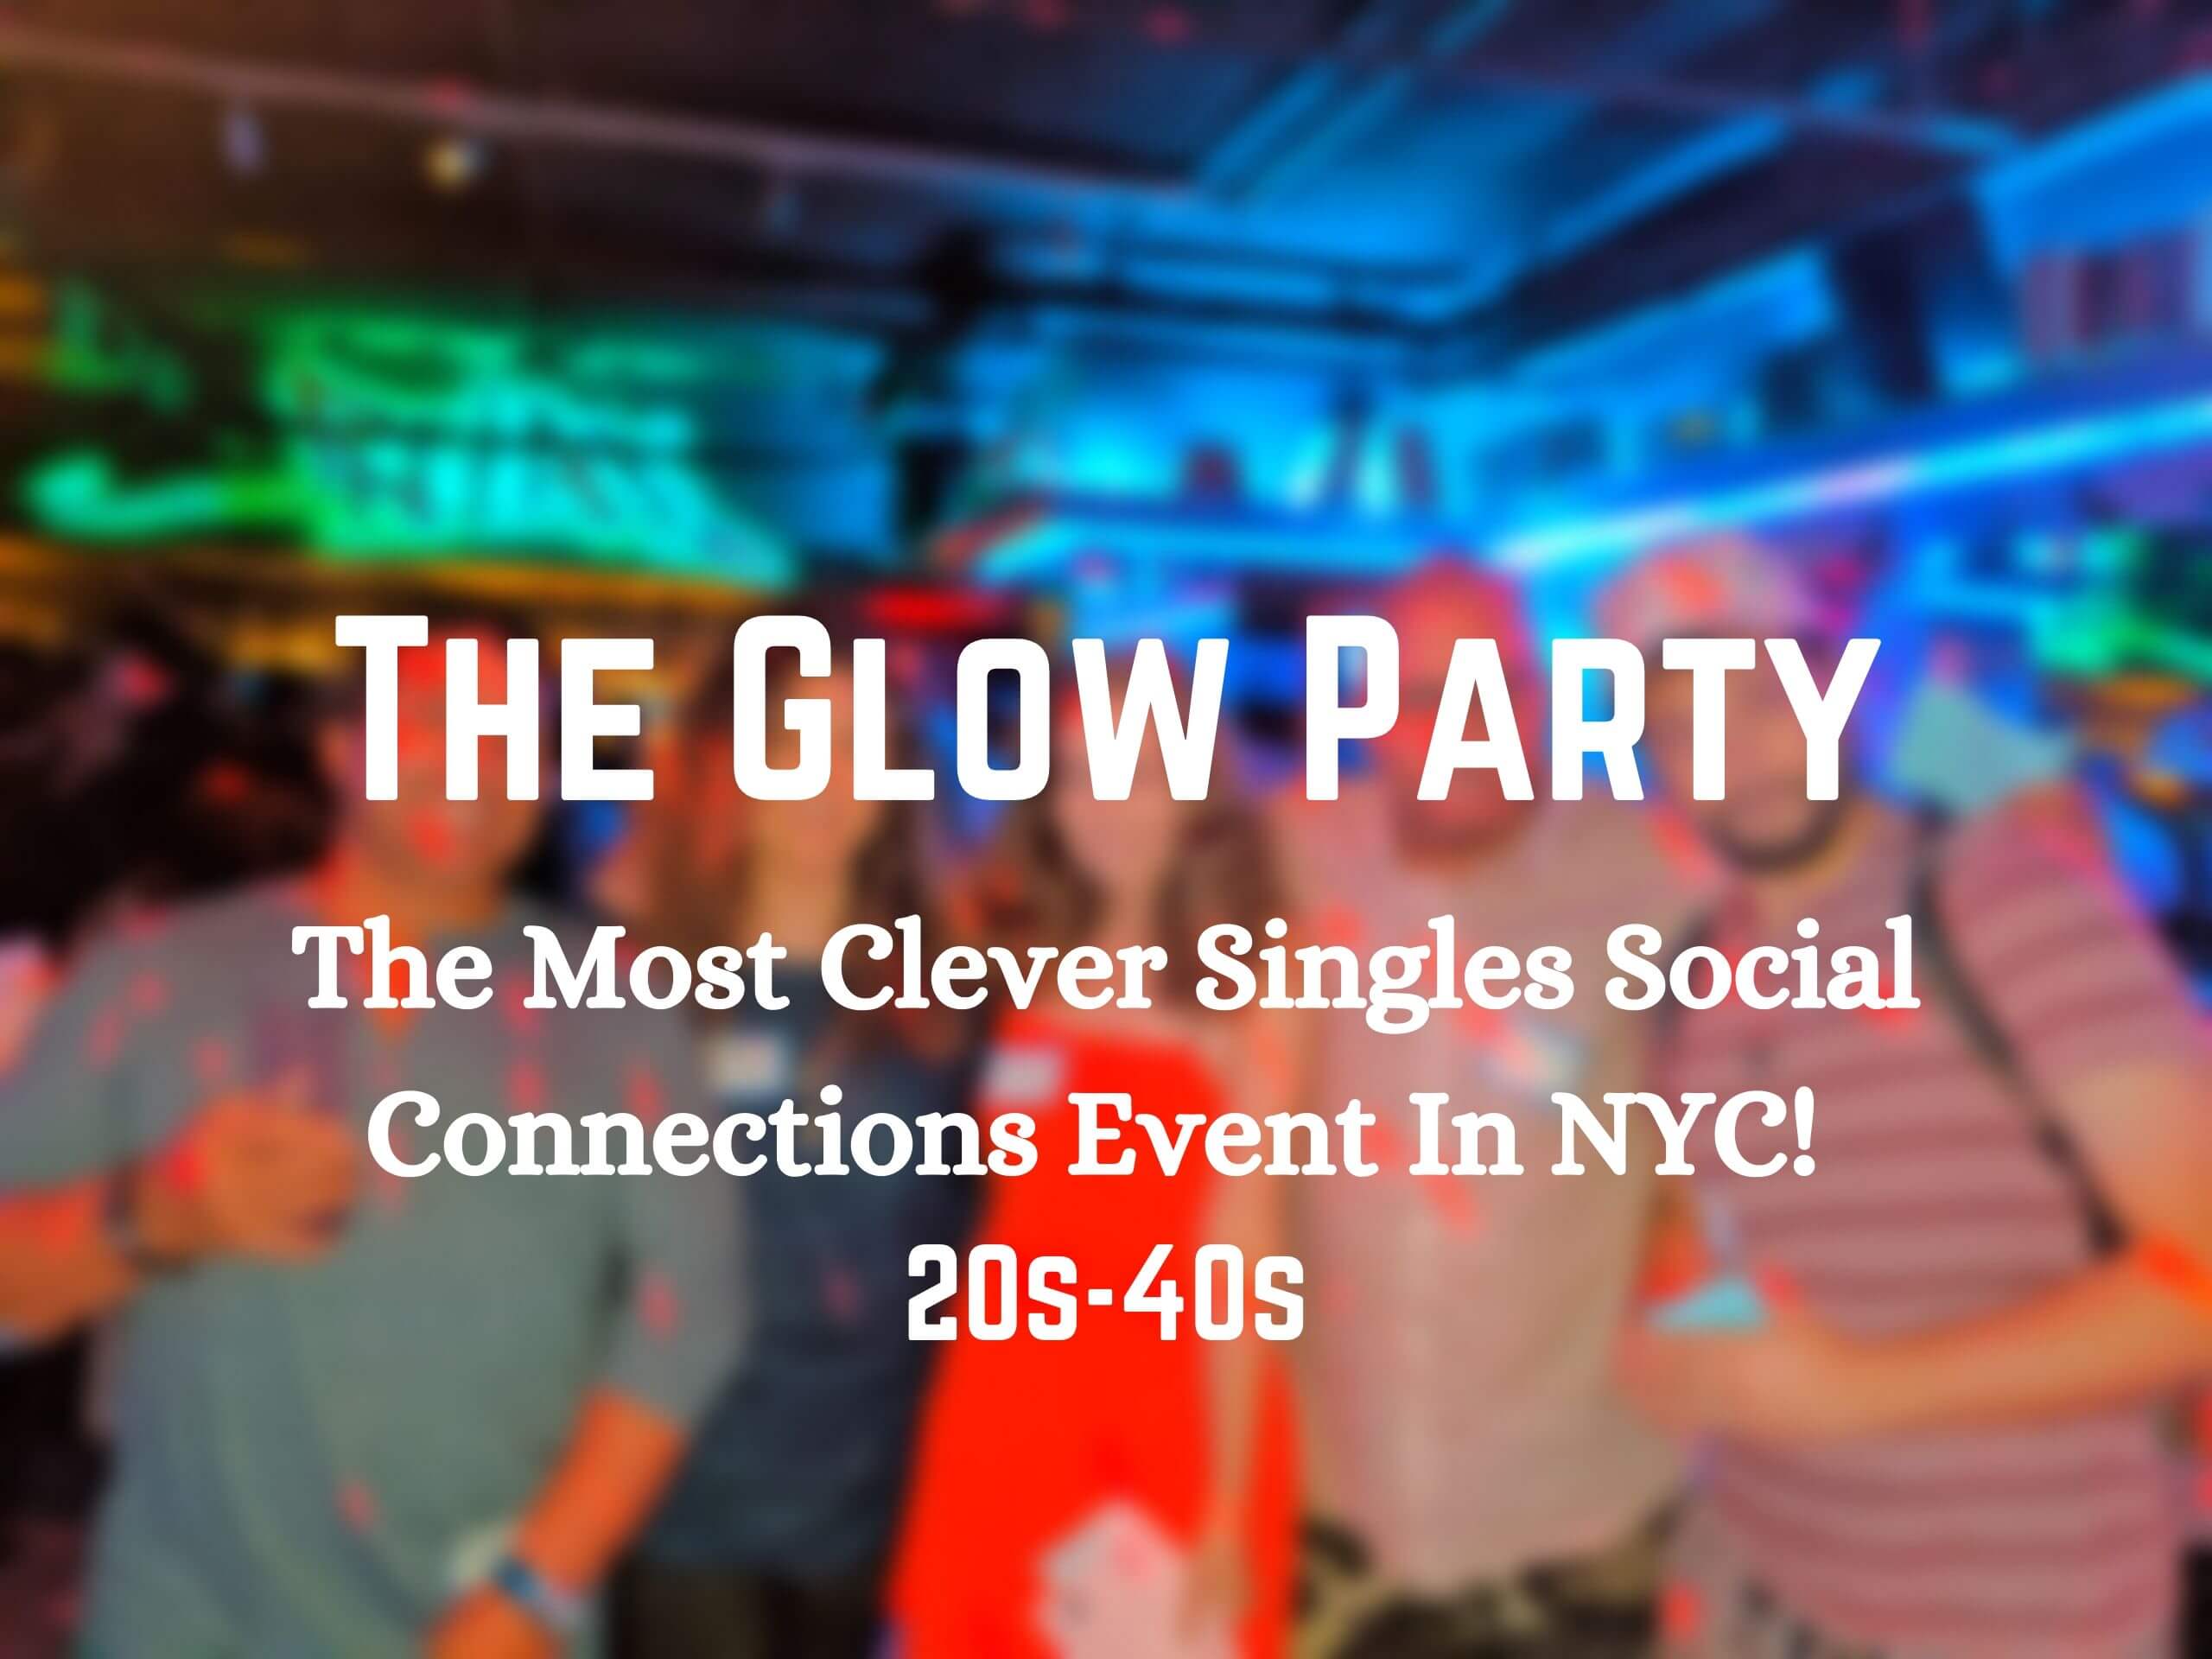 The Glow Party The Most Clever Singles Social Connections Event In NYC